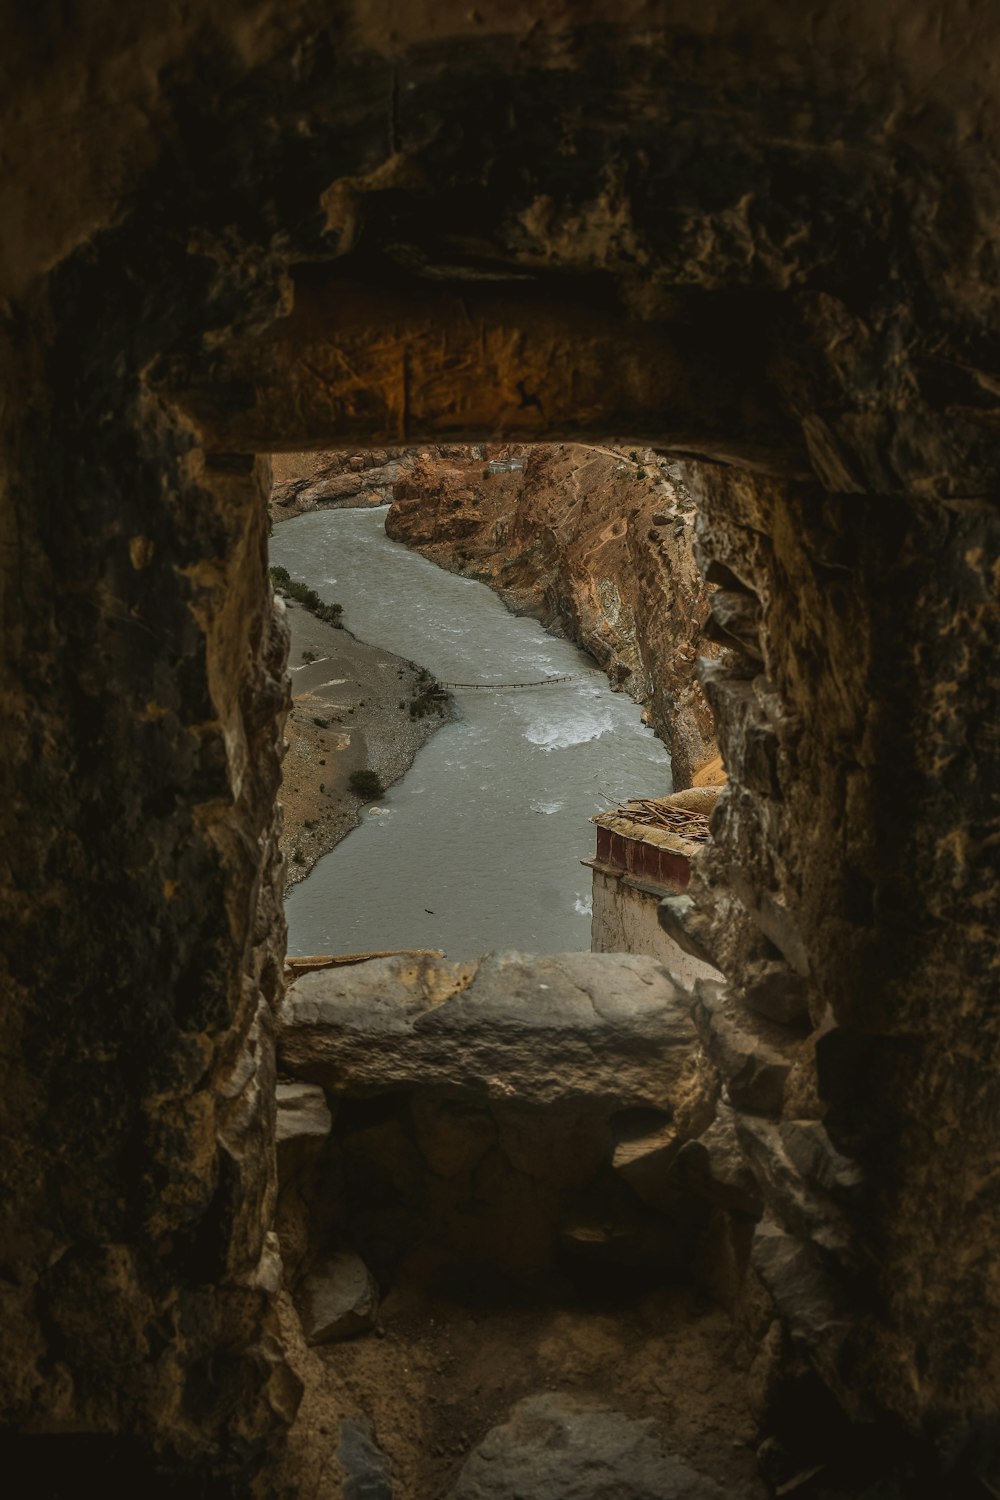 a view of a river through a stone tunnel